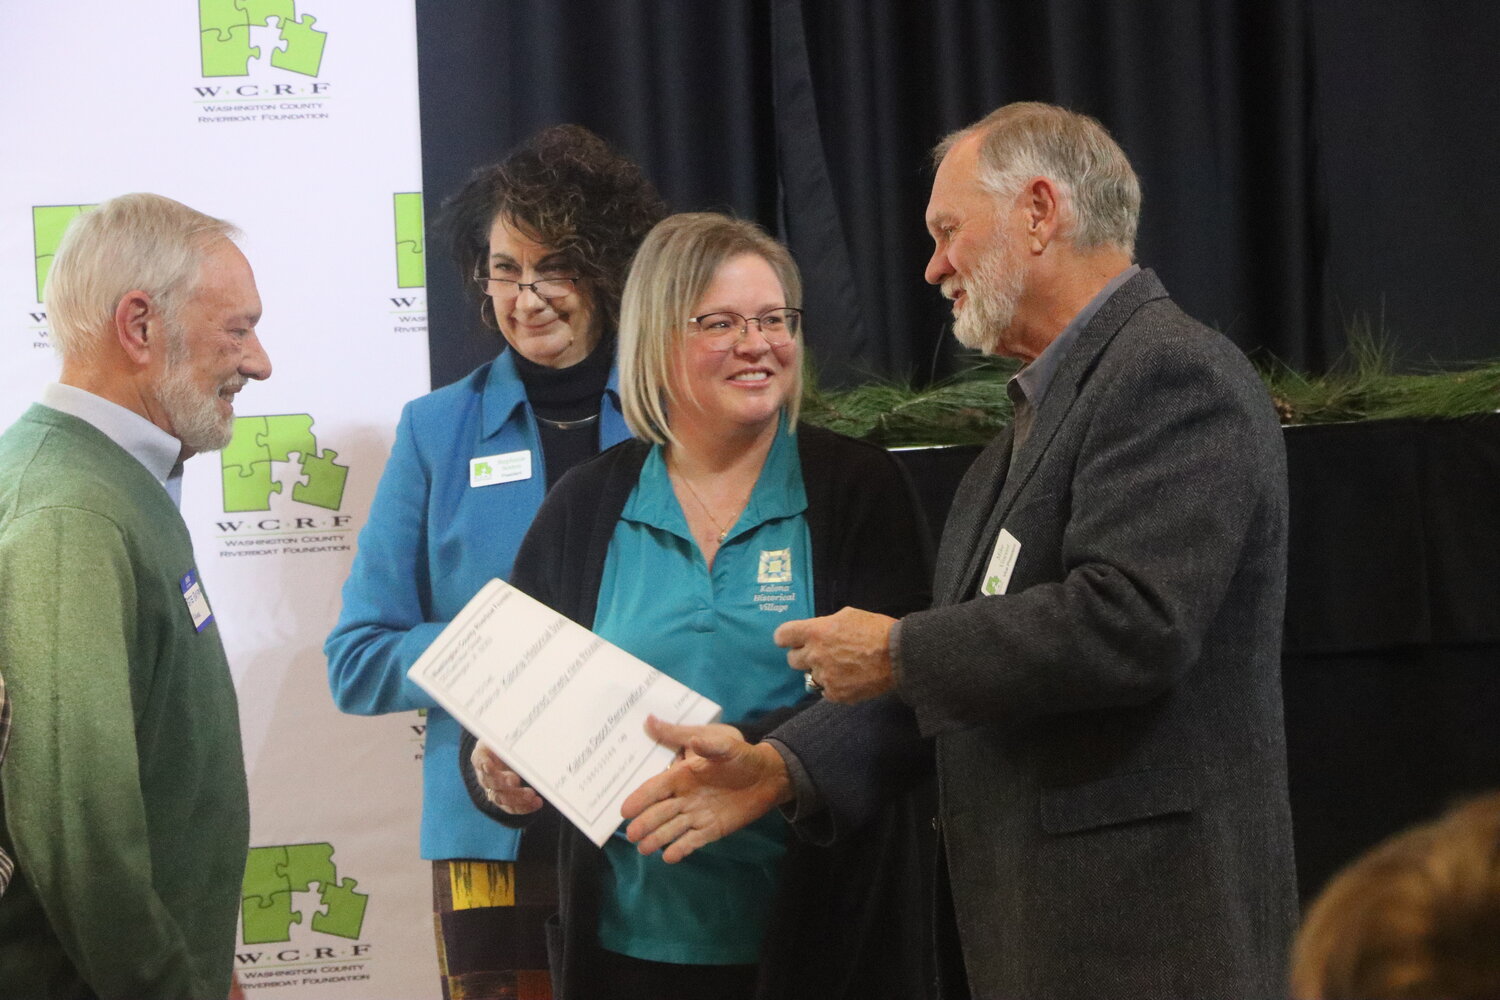 Nancy Roth (center right) receives a giant check from WCRF board vice president Mike Vincent during the awards presentation on Nov. 29.